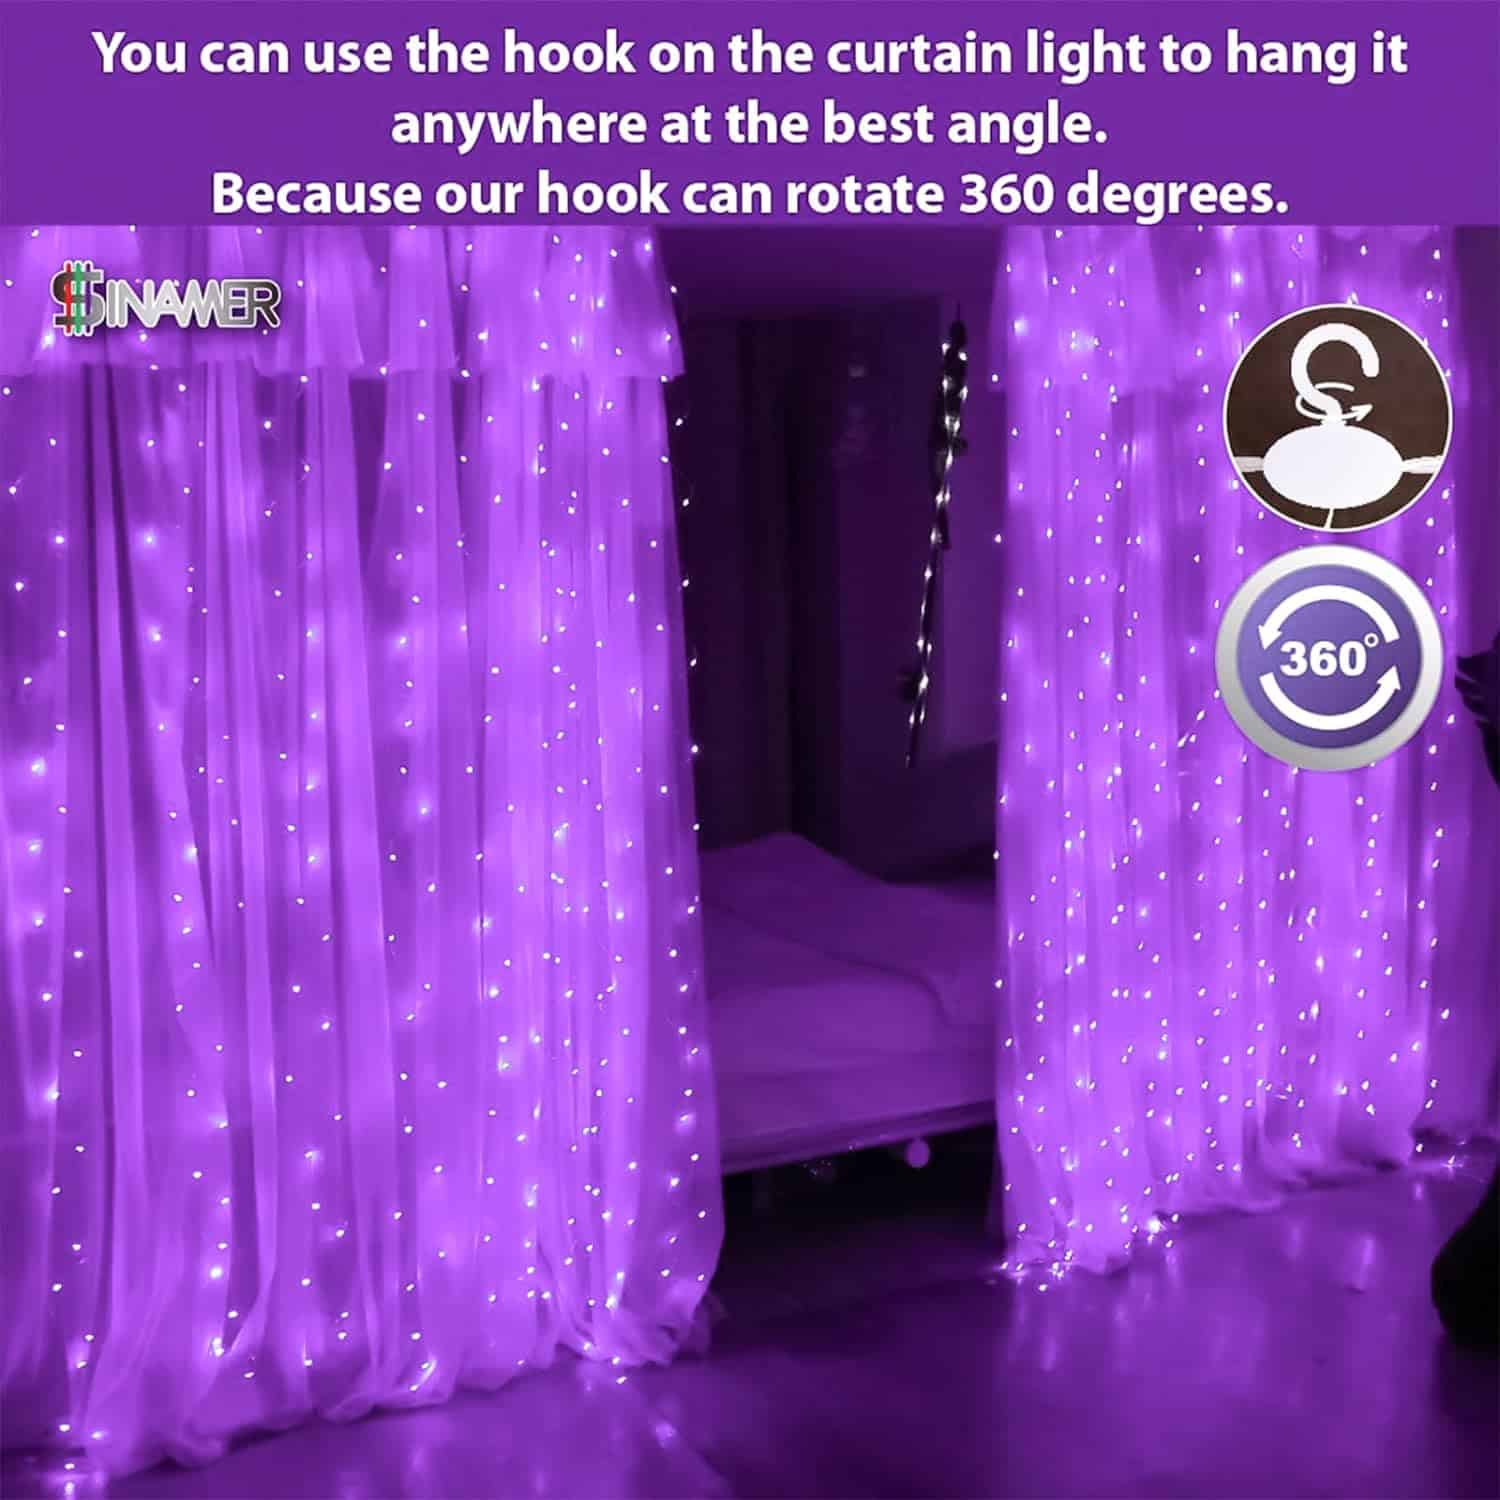 SINAMER White Curtain Light for Bedroom, 300 LED 9.8ft x 9.8ft Window Fairy Curtain String Light with 16 Hooks, 8 Models Remote Control for Wedding Party Home Garden Indoor Decorations